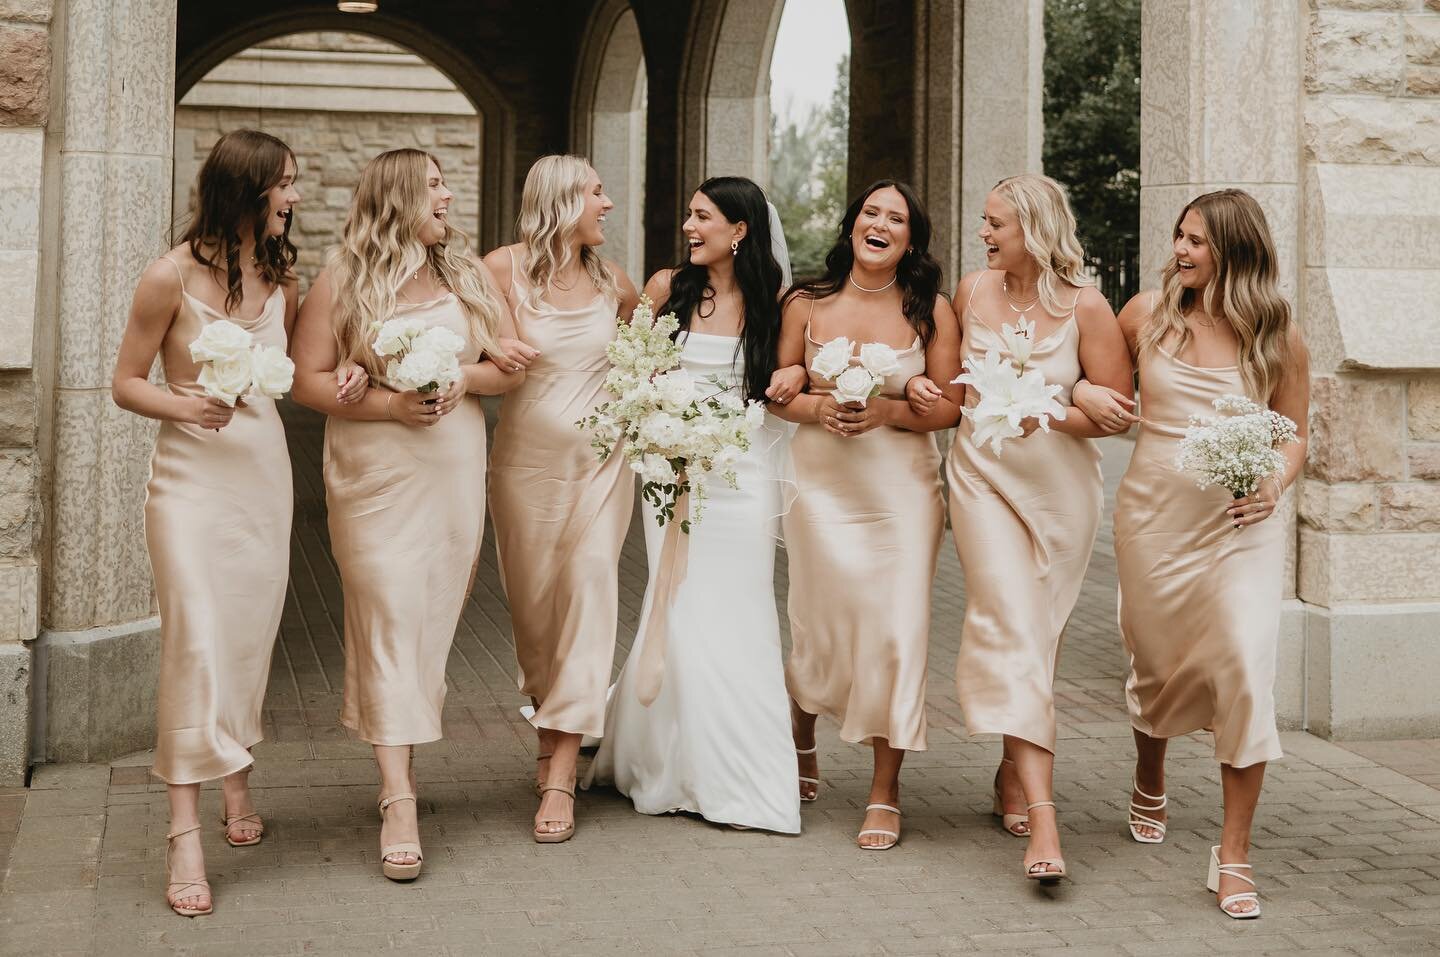 Mismatched bridesmaids bouquets are a current favourite ✨

Each bridesmaid is holding a unique variety of flower that coordinates or compliments the bridal bouquet.